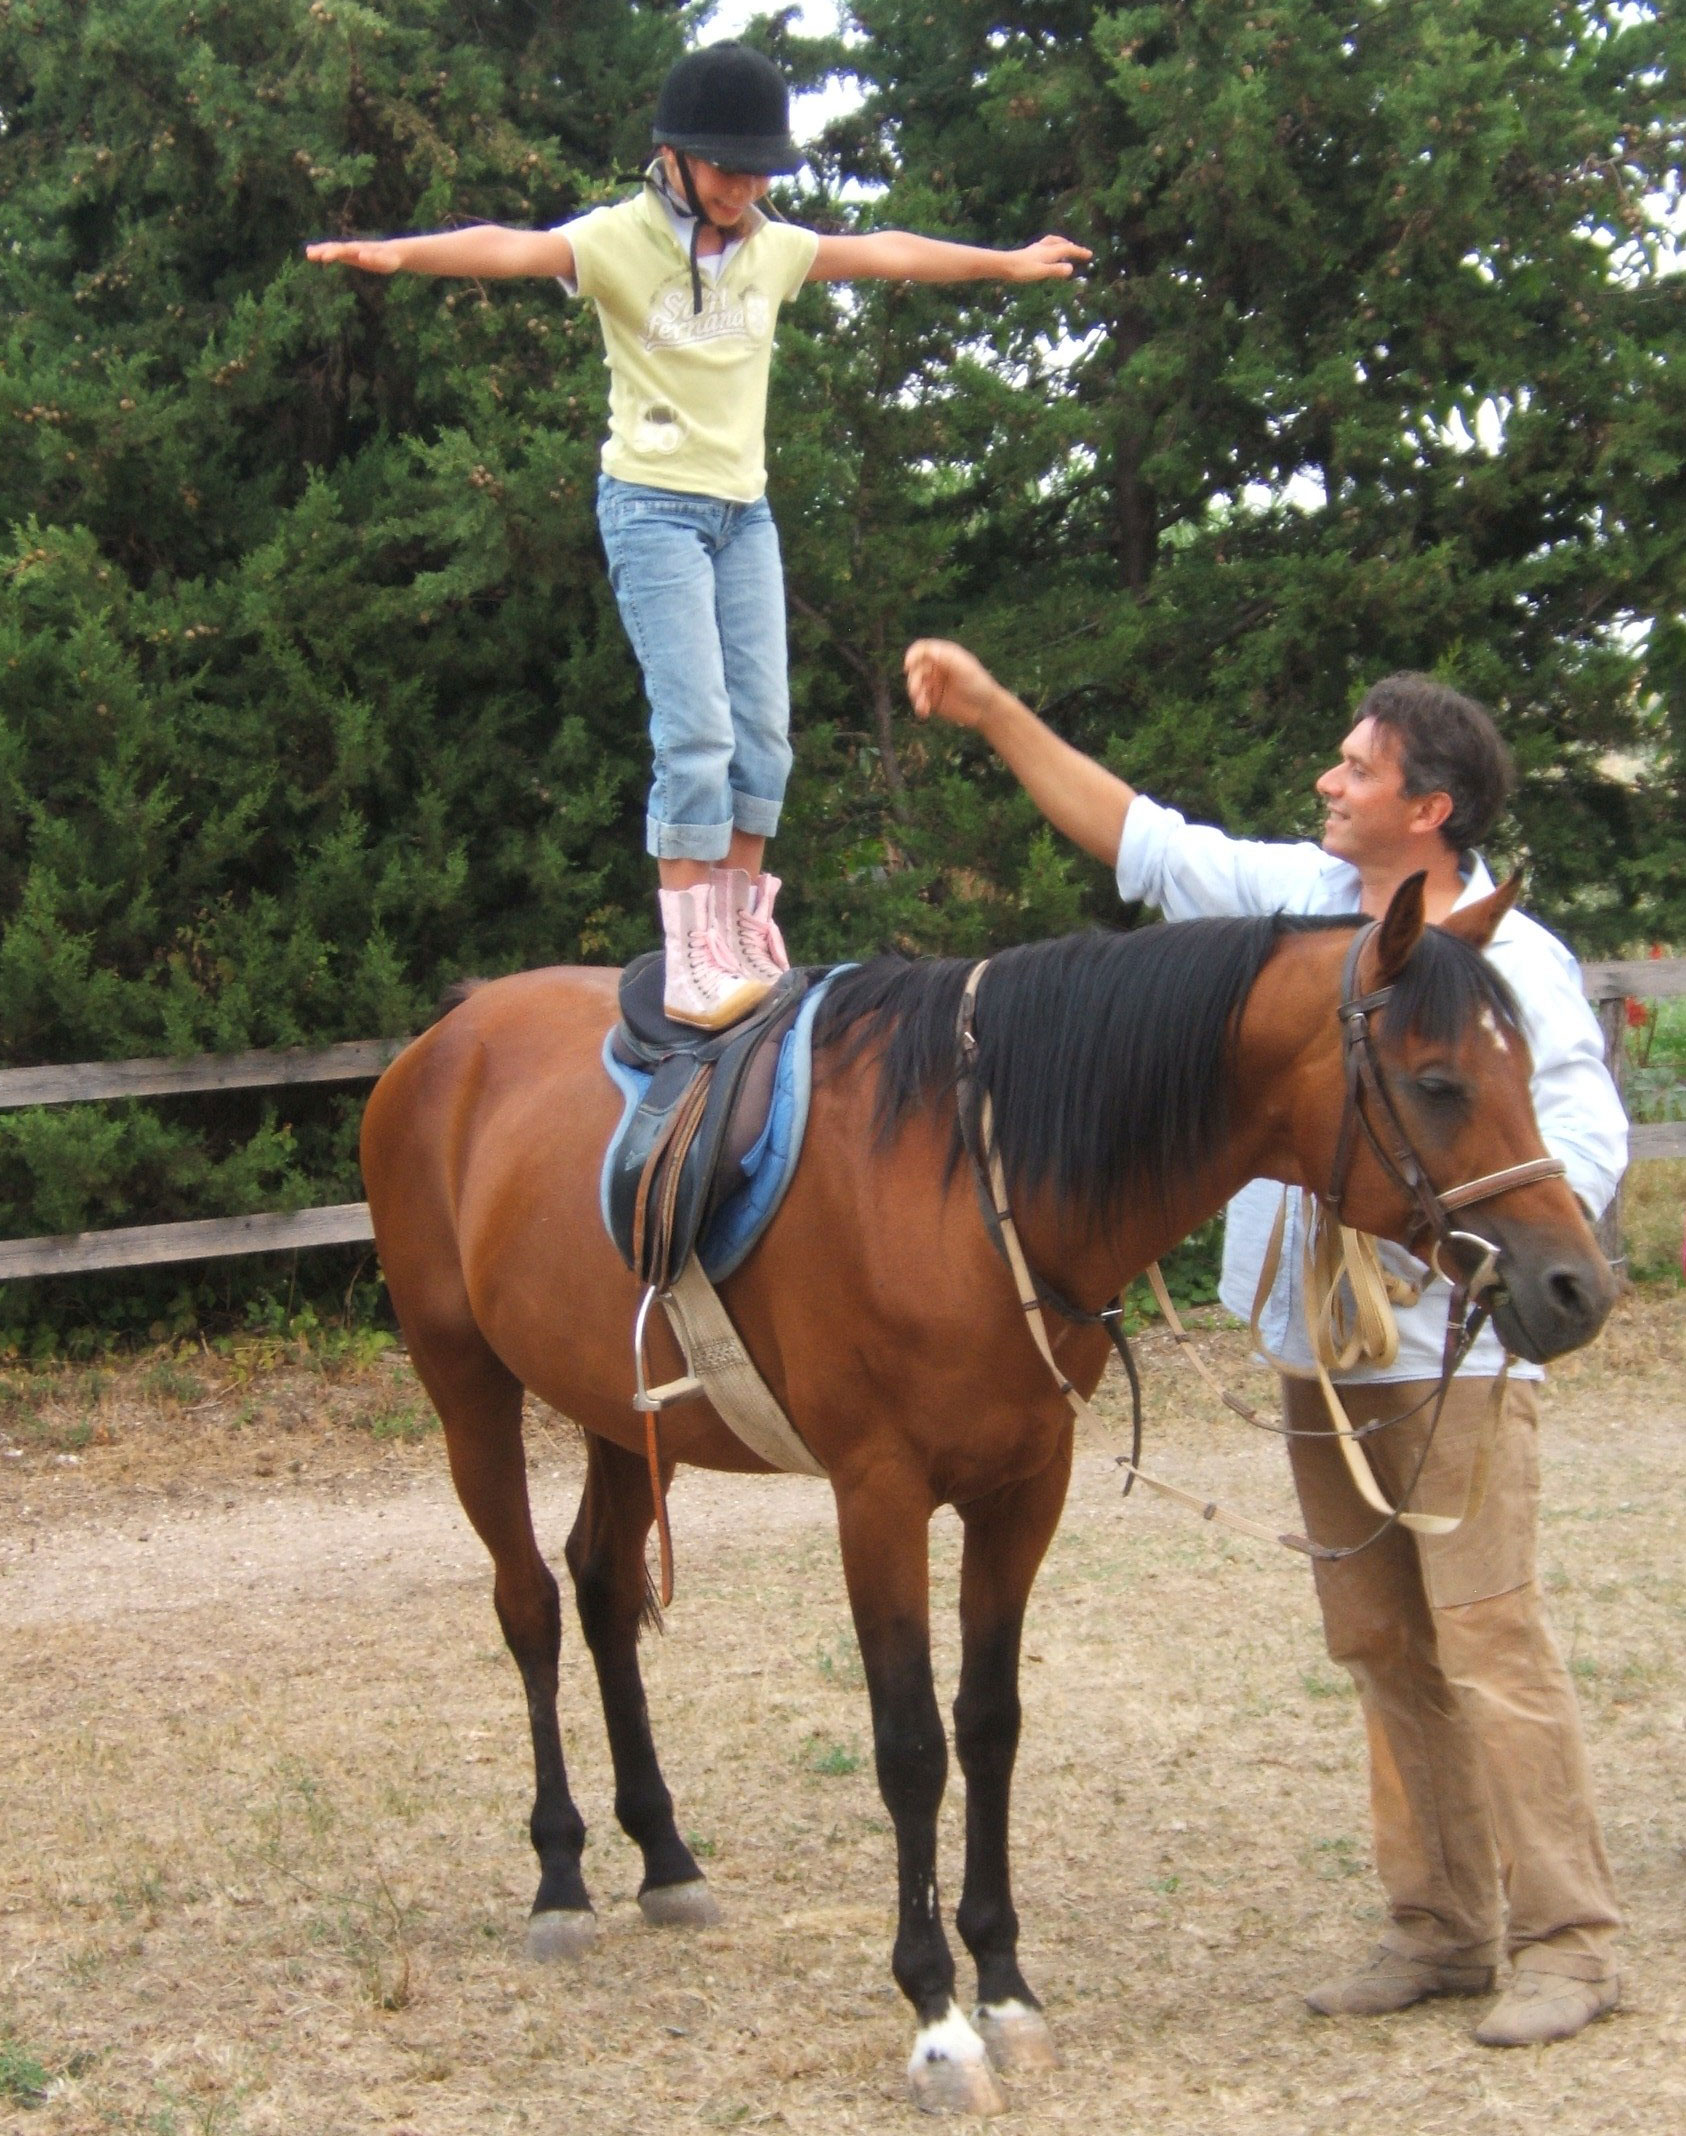 Horse back riding in the Sibillini mountains, lessons just for kids in Marche Italy